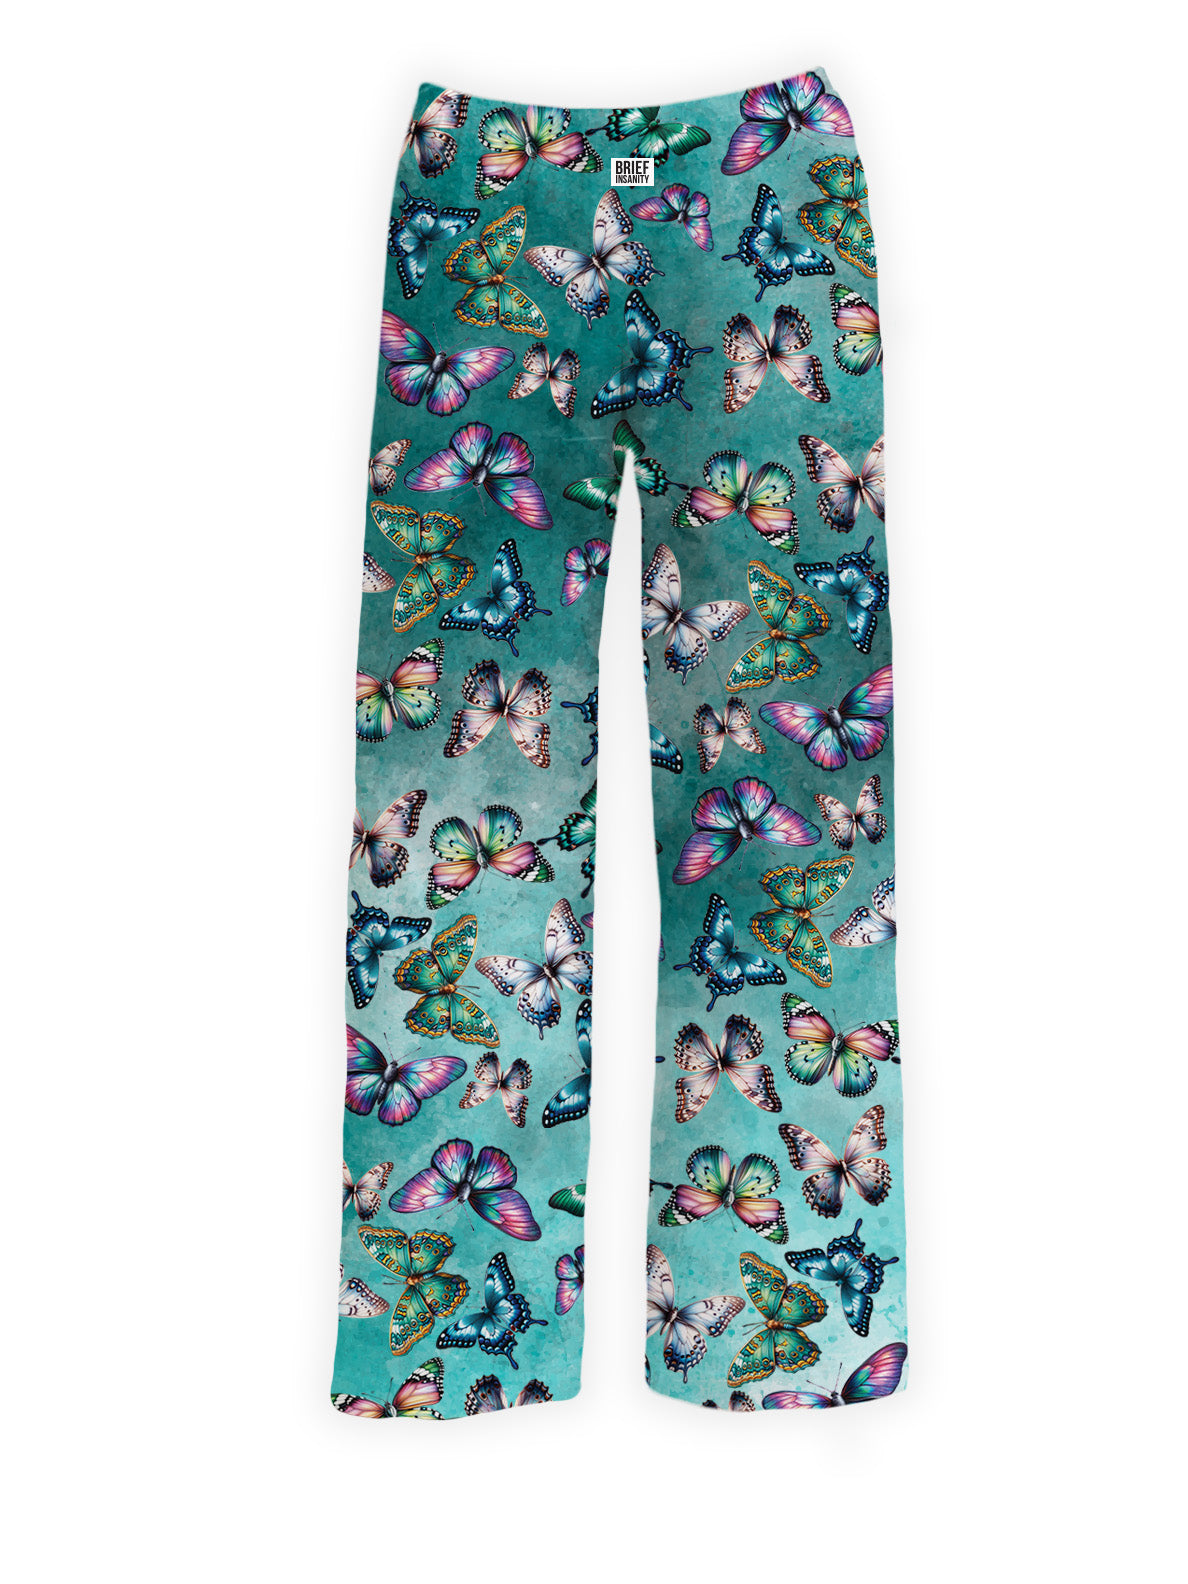 BRIEF INSANITY's Butterfly Pajama Lounge Pants